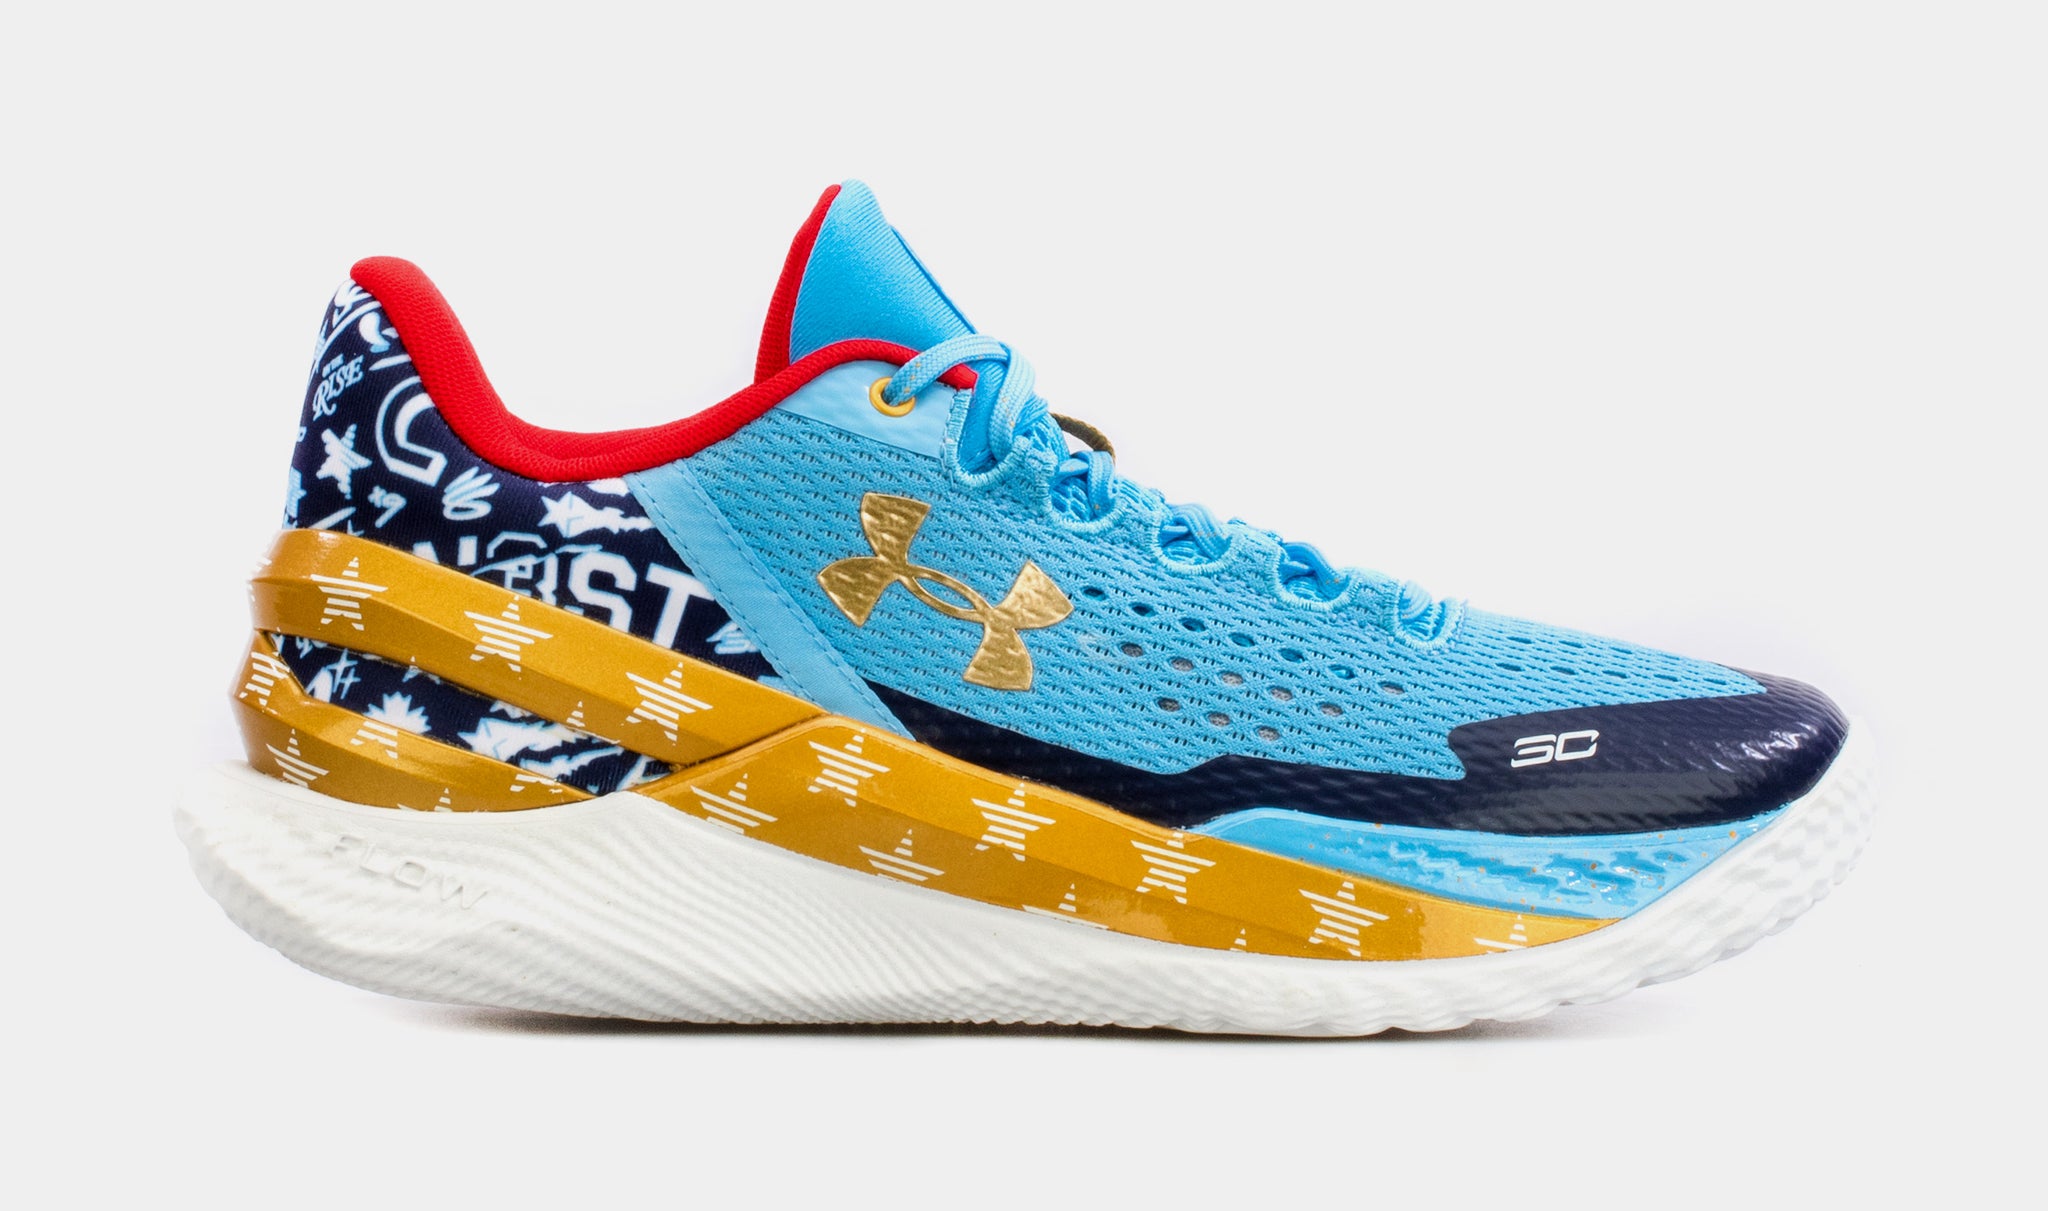 Under Armour 2 Low Flotro All Star Mens Basketball Shoes Blue Yellow Free S 3026276-402 – Shoe Palace